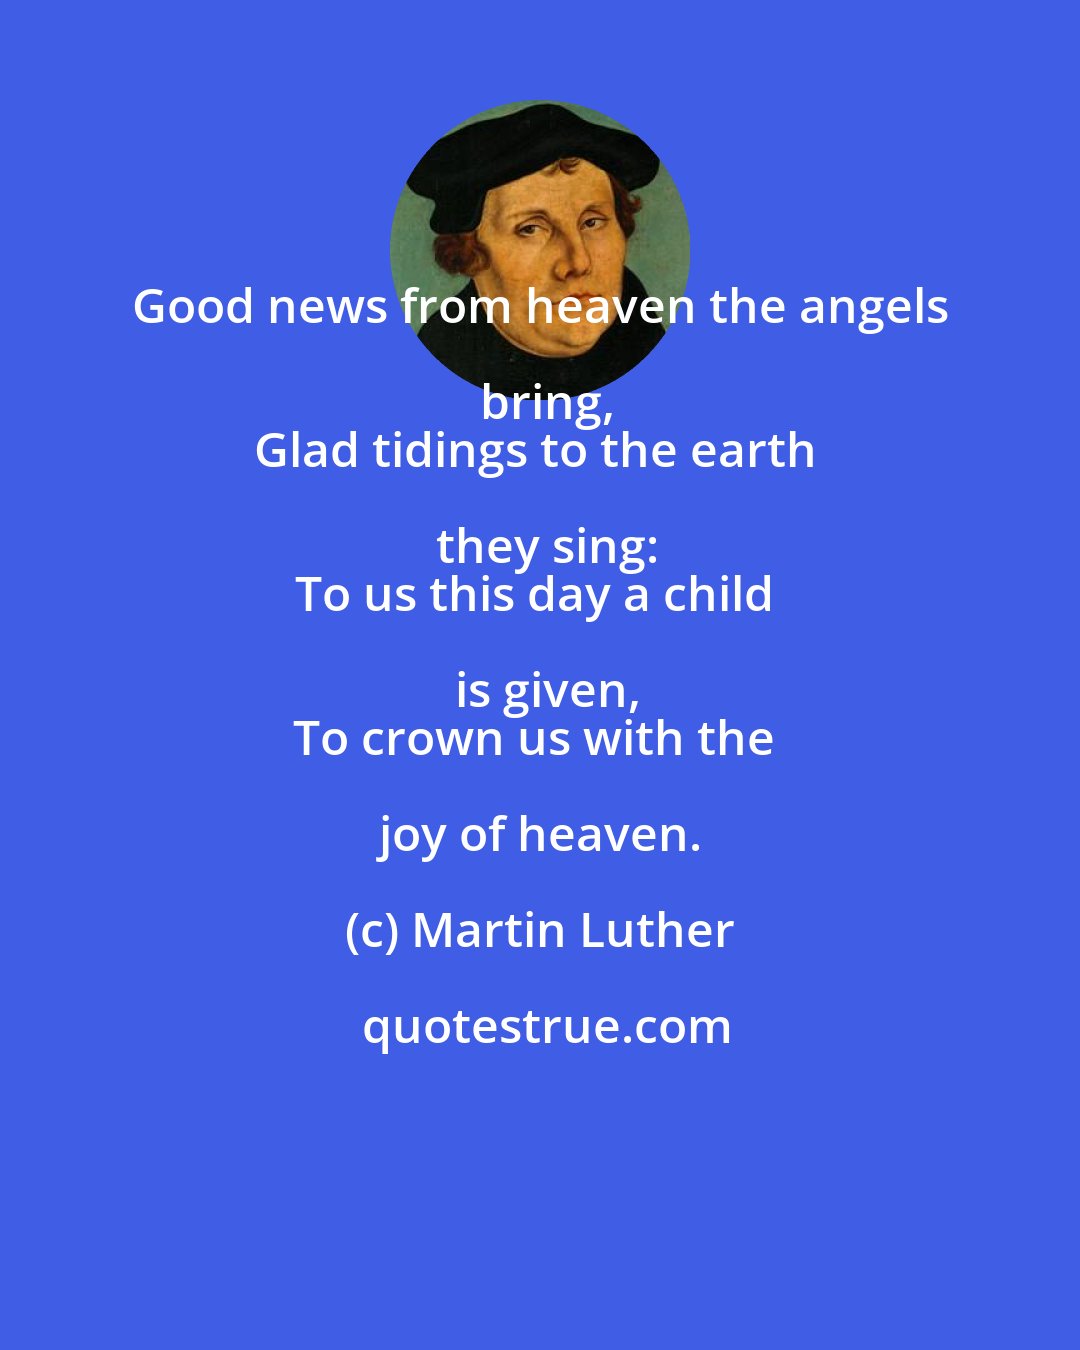 Martin Luther: Good news from heaven the angels bring,
Glad tidings to the earth they sing:
To us this day a child is given,
To crown us with the joy of heaven.